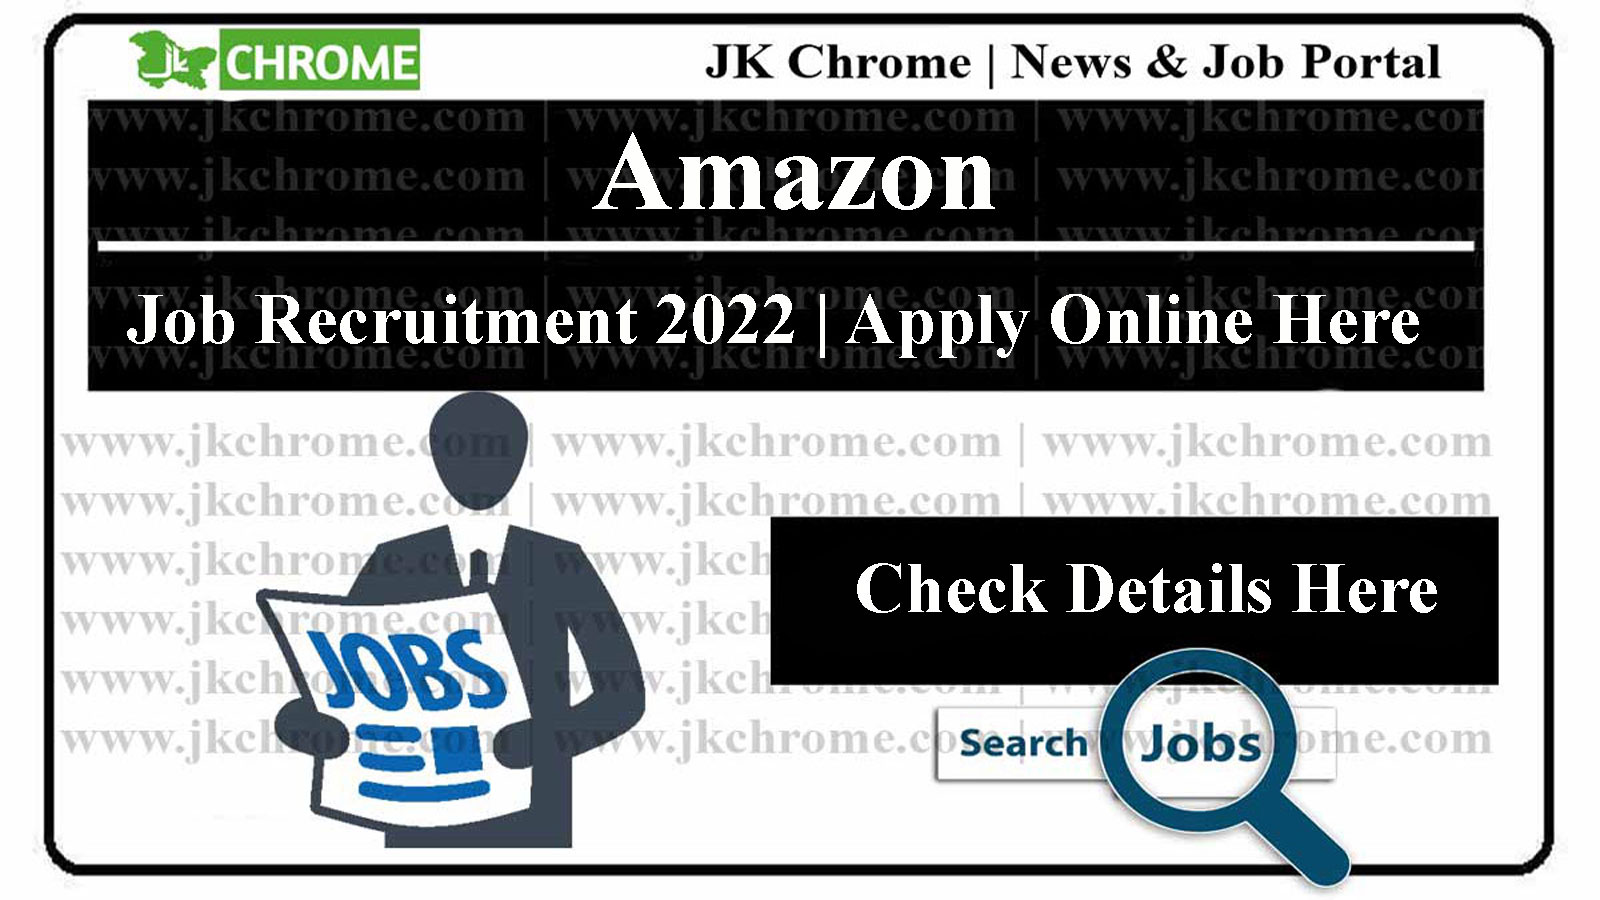 Amazon Jobs, Hiring Account Manager, Apply Online at www.amazon.jobs